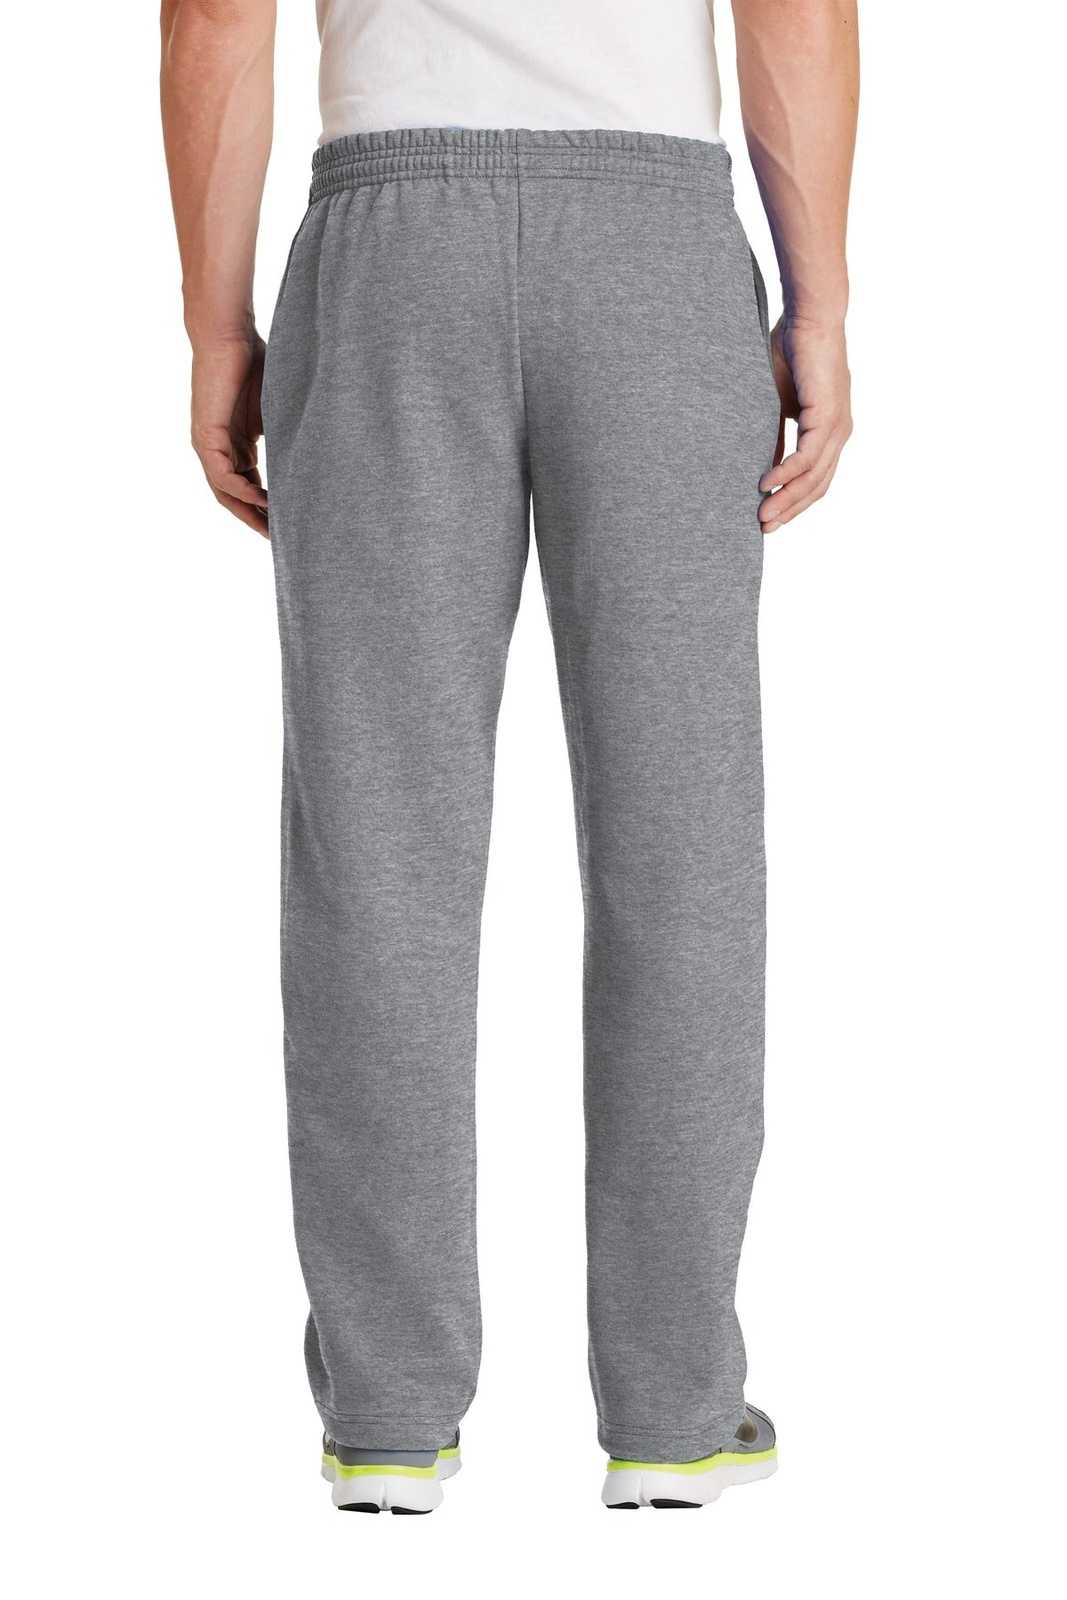 Port & Company PC78P Core Fleece Sweatpant with Pockets - Athletic Heather - HIT a Double - 1